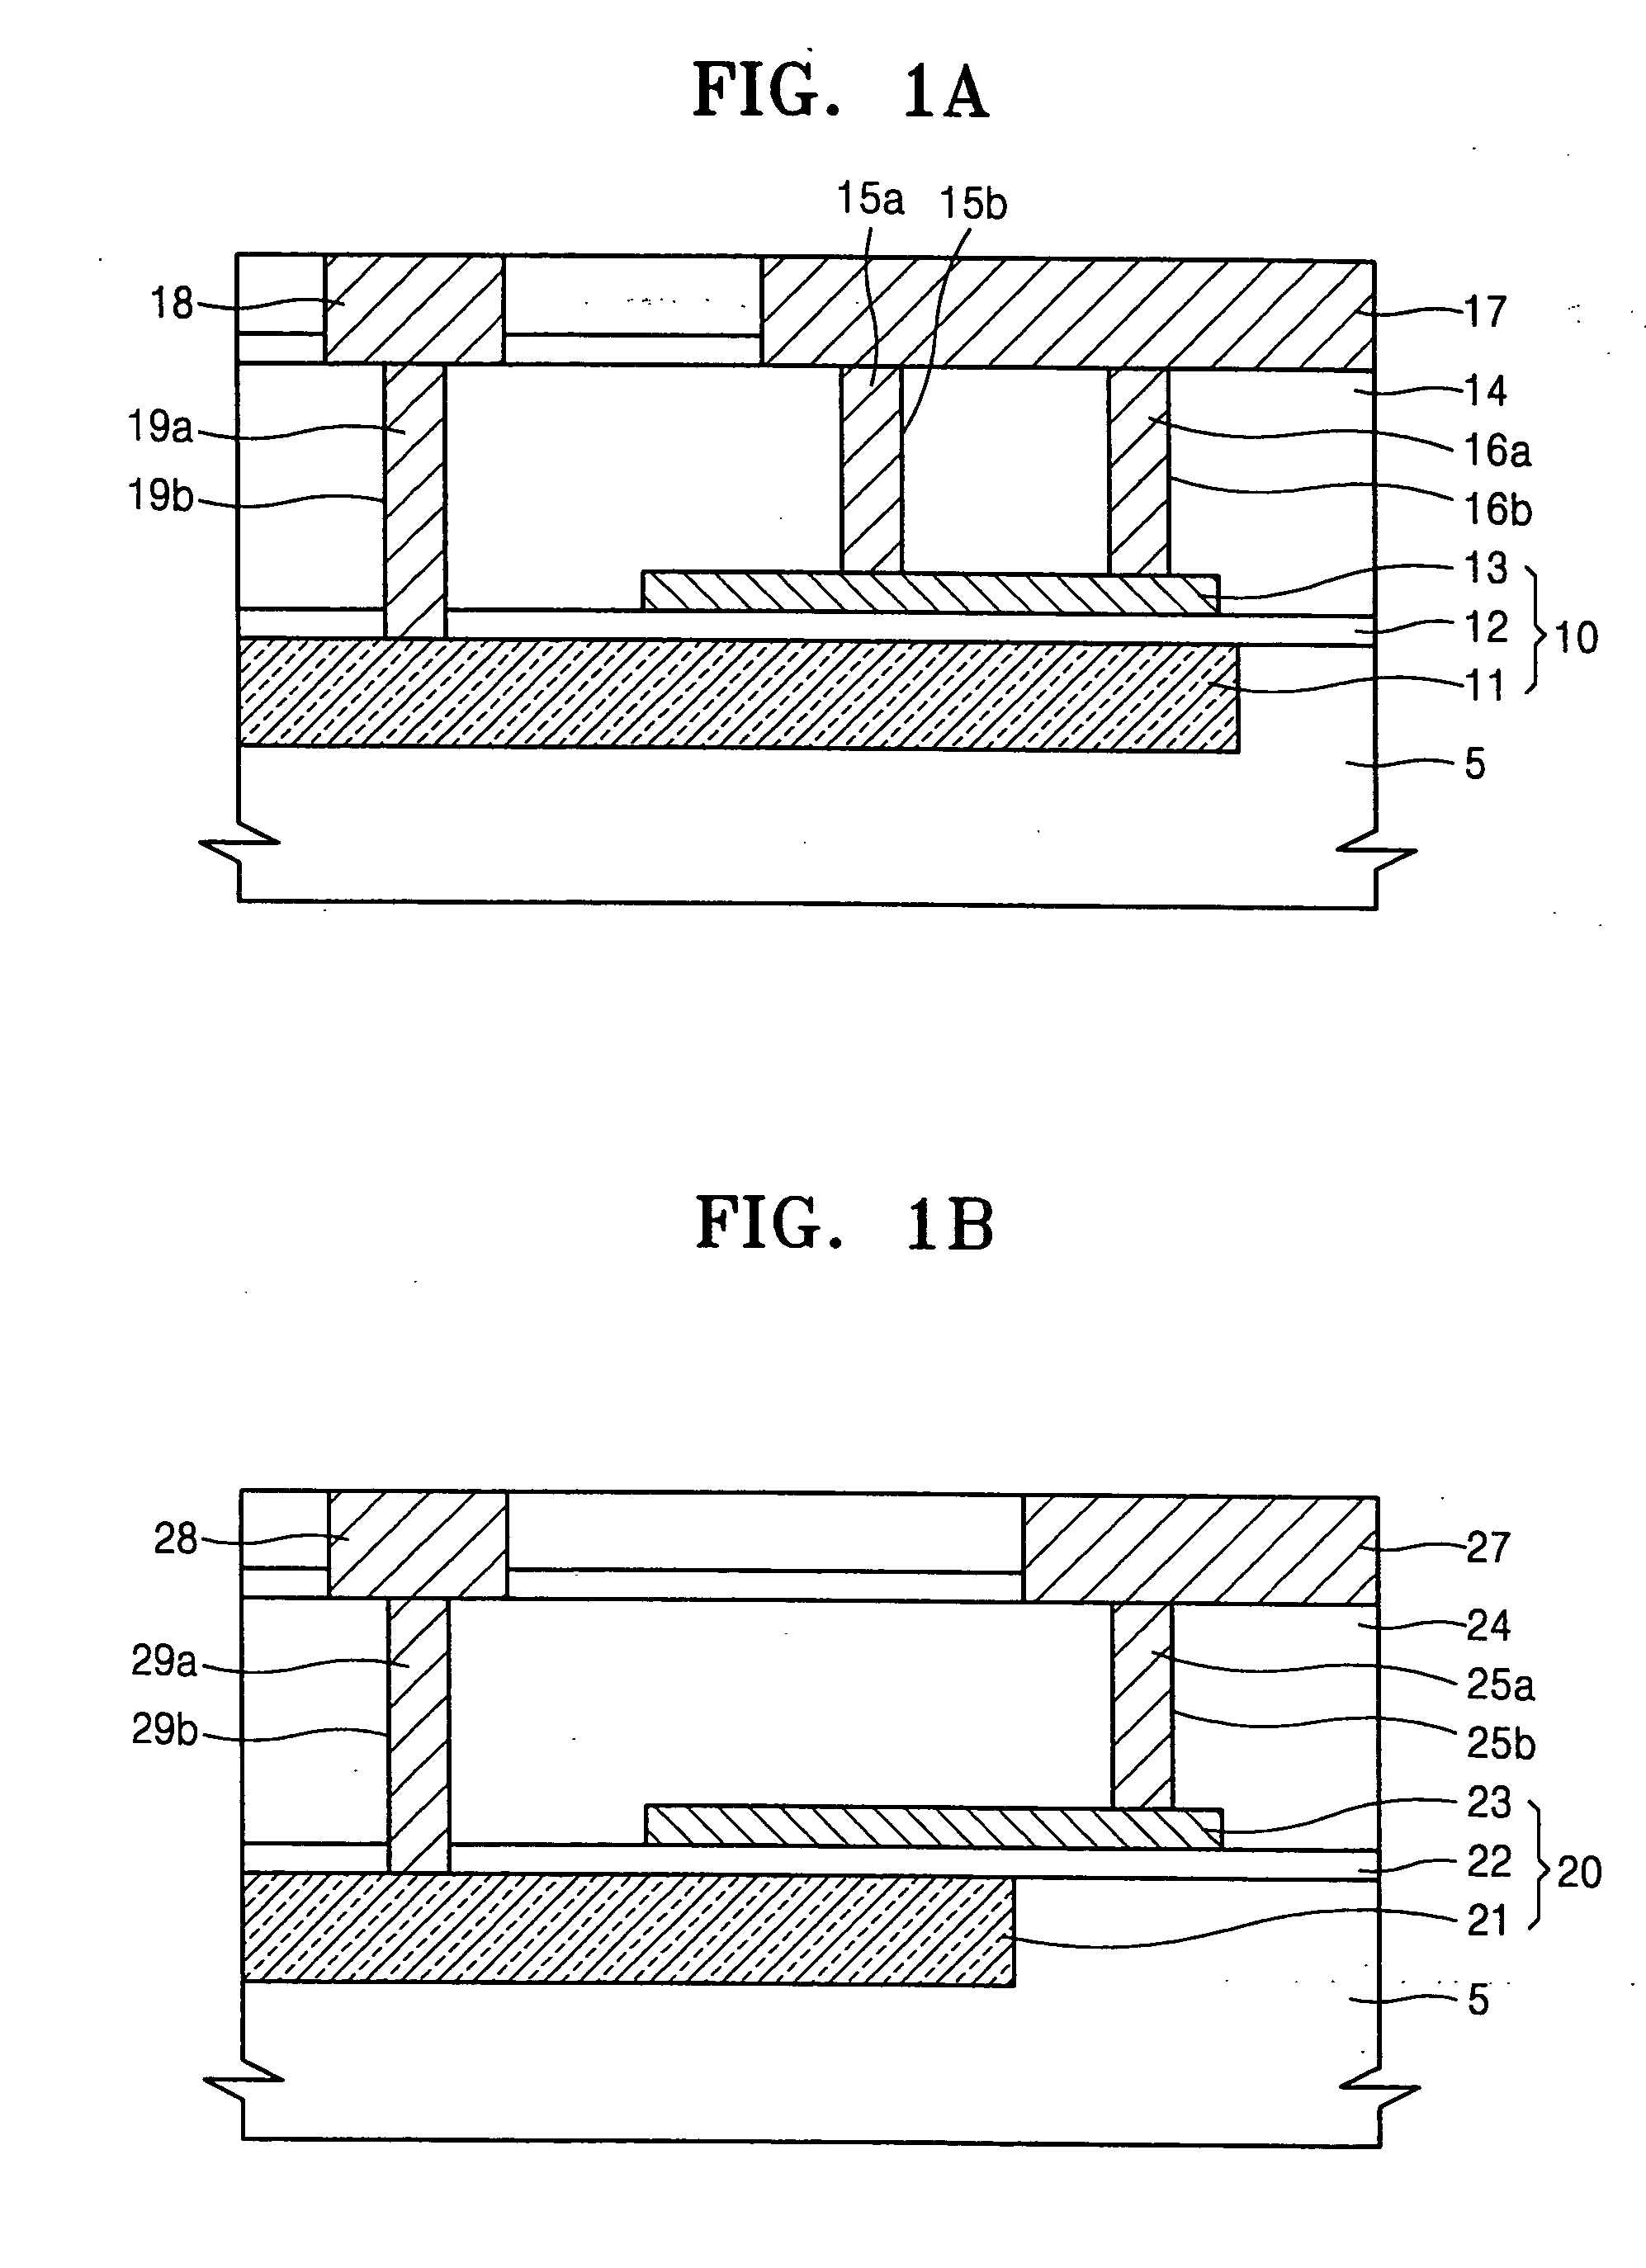 Metal-insulator-metal capacitor and interconnecting structure